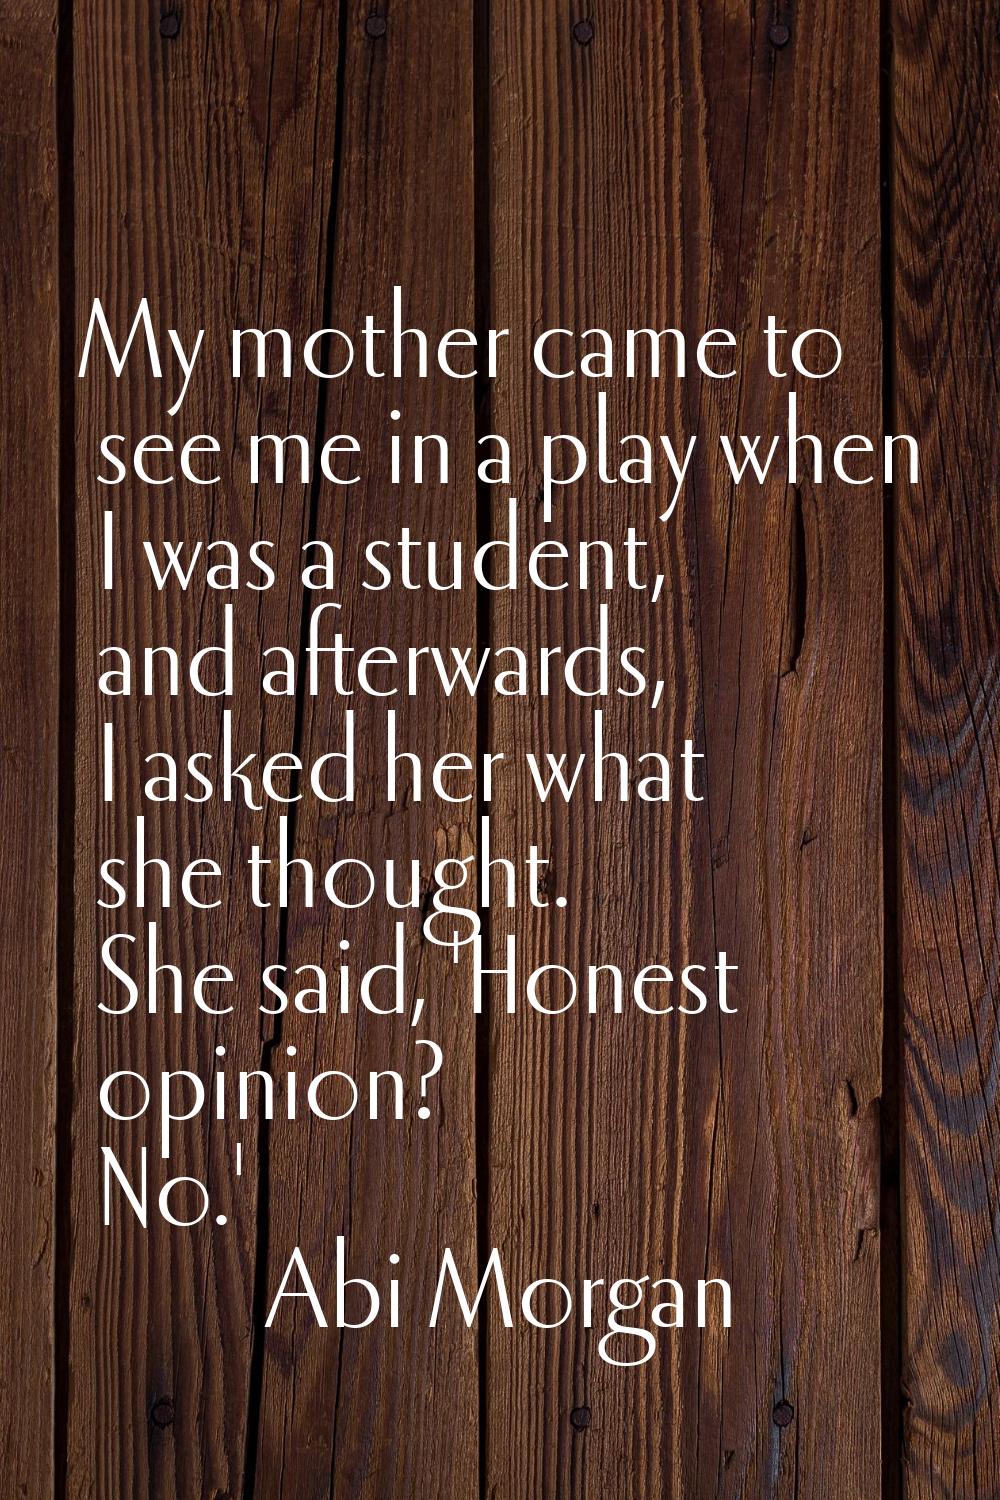 My mother came to see me in a play when I was a student, and afterwards, I asked her what she thoug